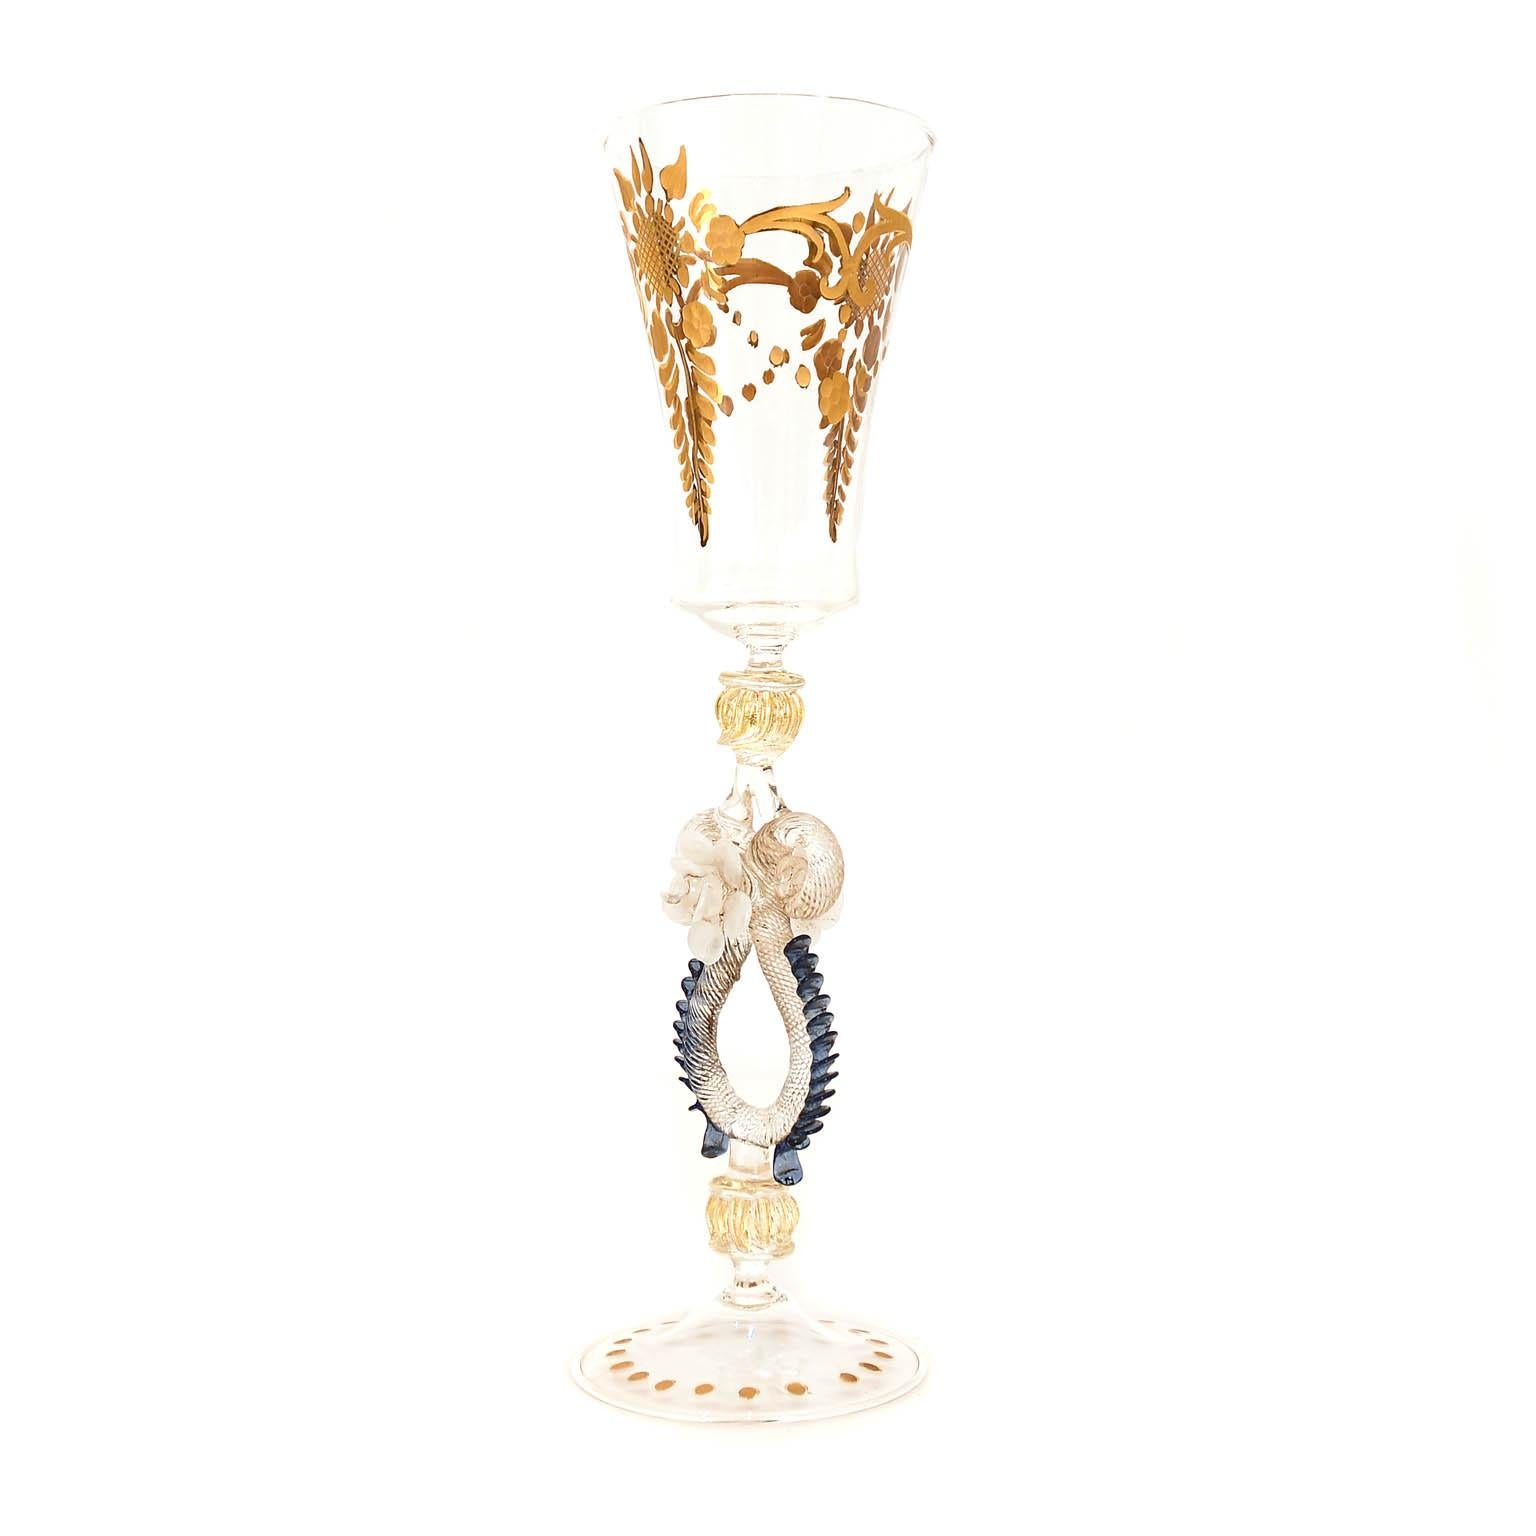 Italian handcrafted chalice in clear, gold, white and blue glass. The stem is cutted and decorated with gold. Due to the cut the gold is glossy and matte.
The base is also decoratied in the same way with dots. The stem is adorned with different